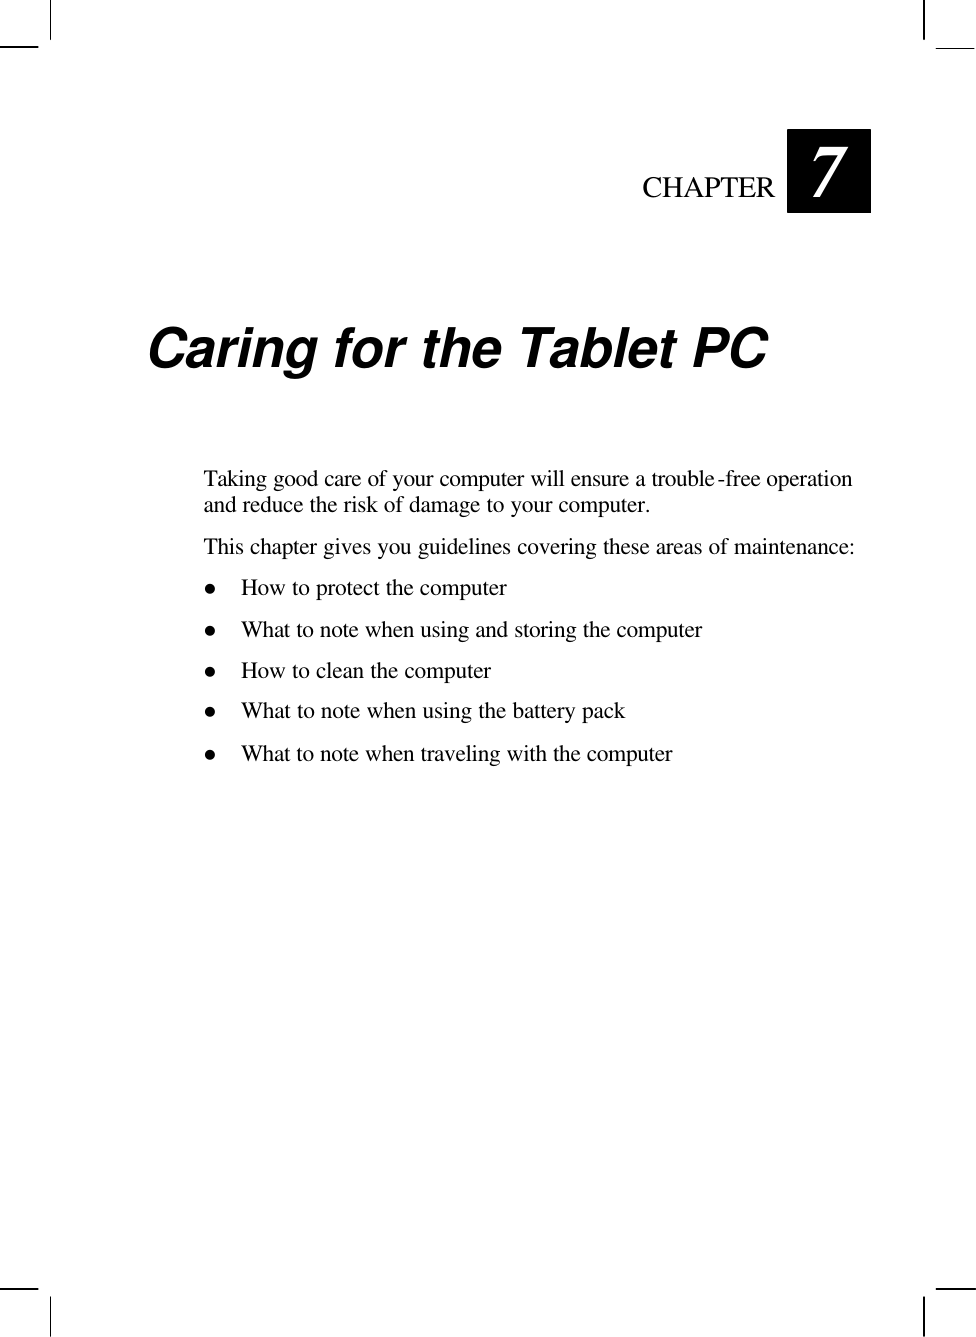   CHAPTER 7 Caring for the Tablet PC Taking good care of your computer will ensure a trouble-free operation and reduce the risk of damage to your computer. This chapter gives you guidelines covering these areas of maintenance: l How to protect the computer l What to note when using and storing the computer l How to clean the computer l What to note when using the battery pack l What to note when traveling with the computer 